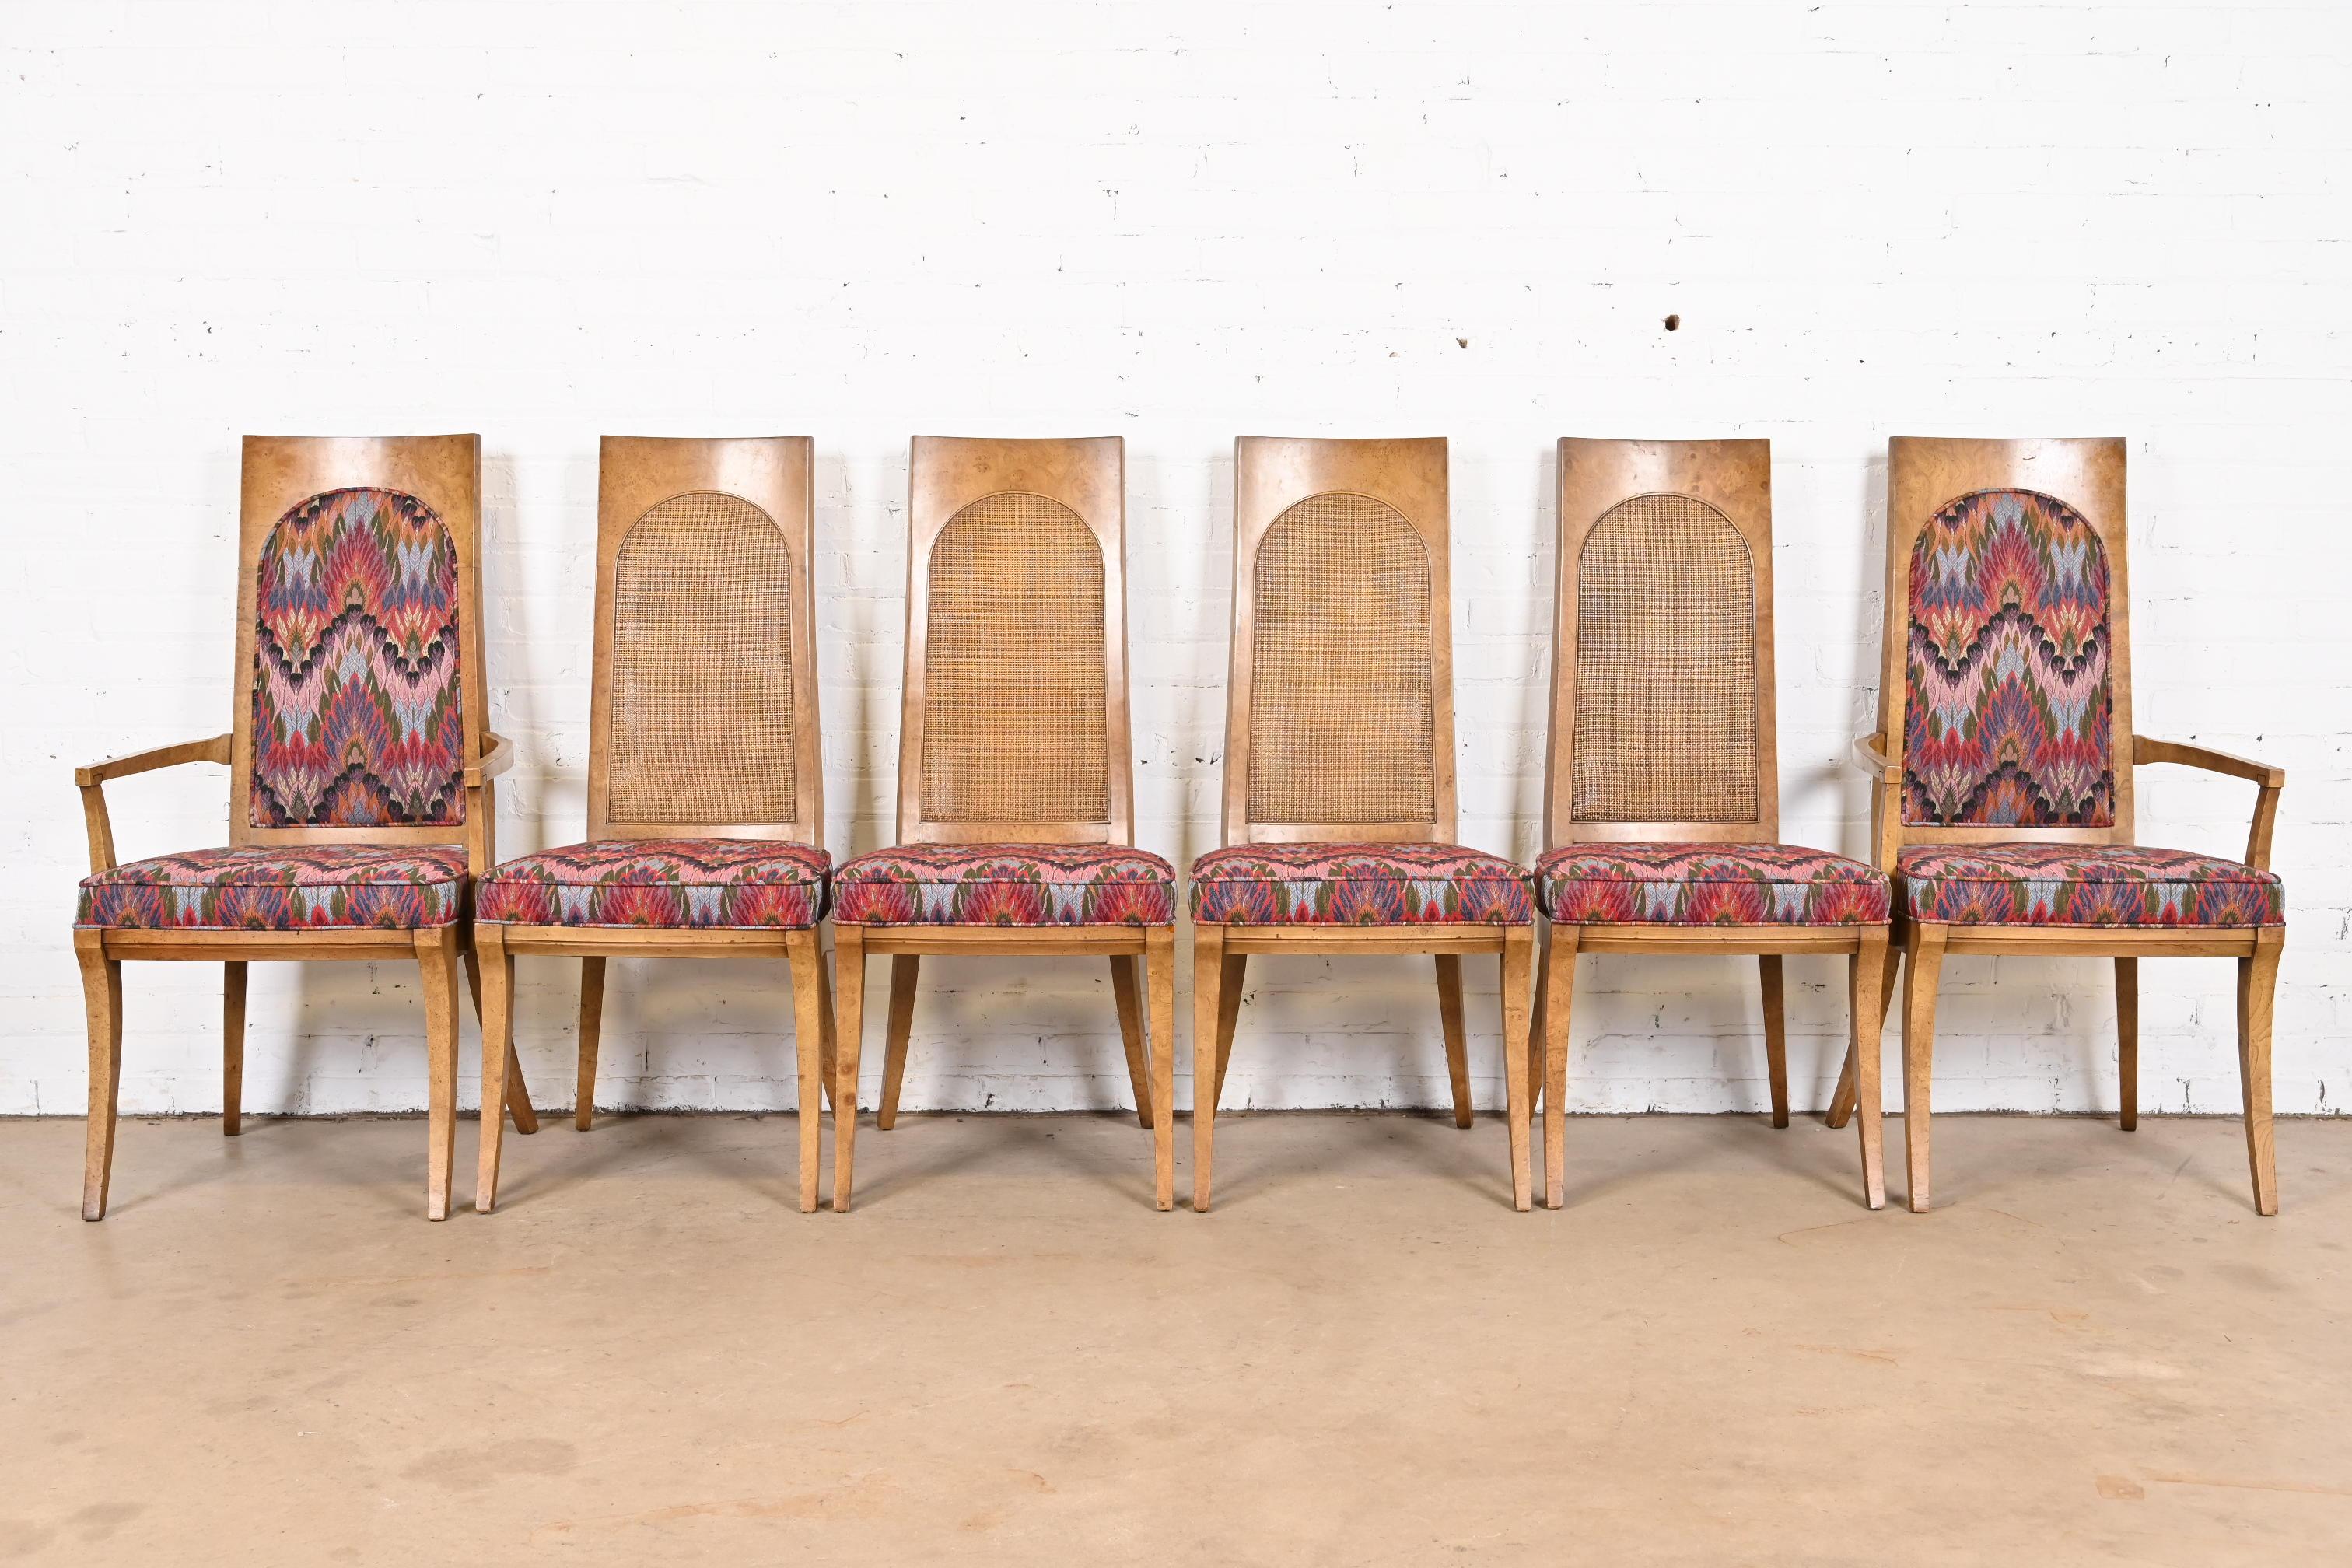 An outstanding set of six Mid-Century Modern Hollywood Regency dining chairs

By Karges Furniture

USA, Circa 1960s

Gorgeous burl wood frames, with caned backs, and peacock patterned upholstery.

Measures:
Side chairs: 19